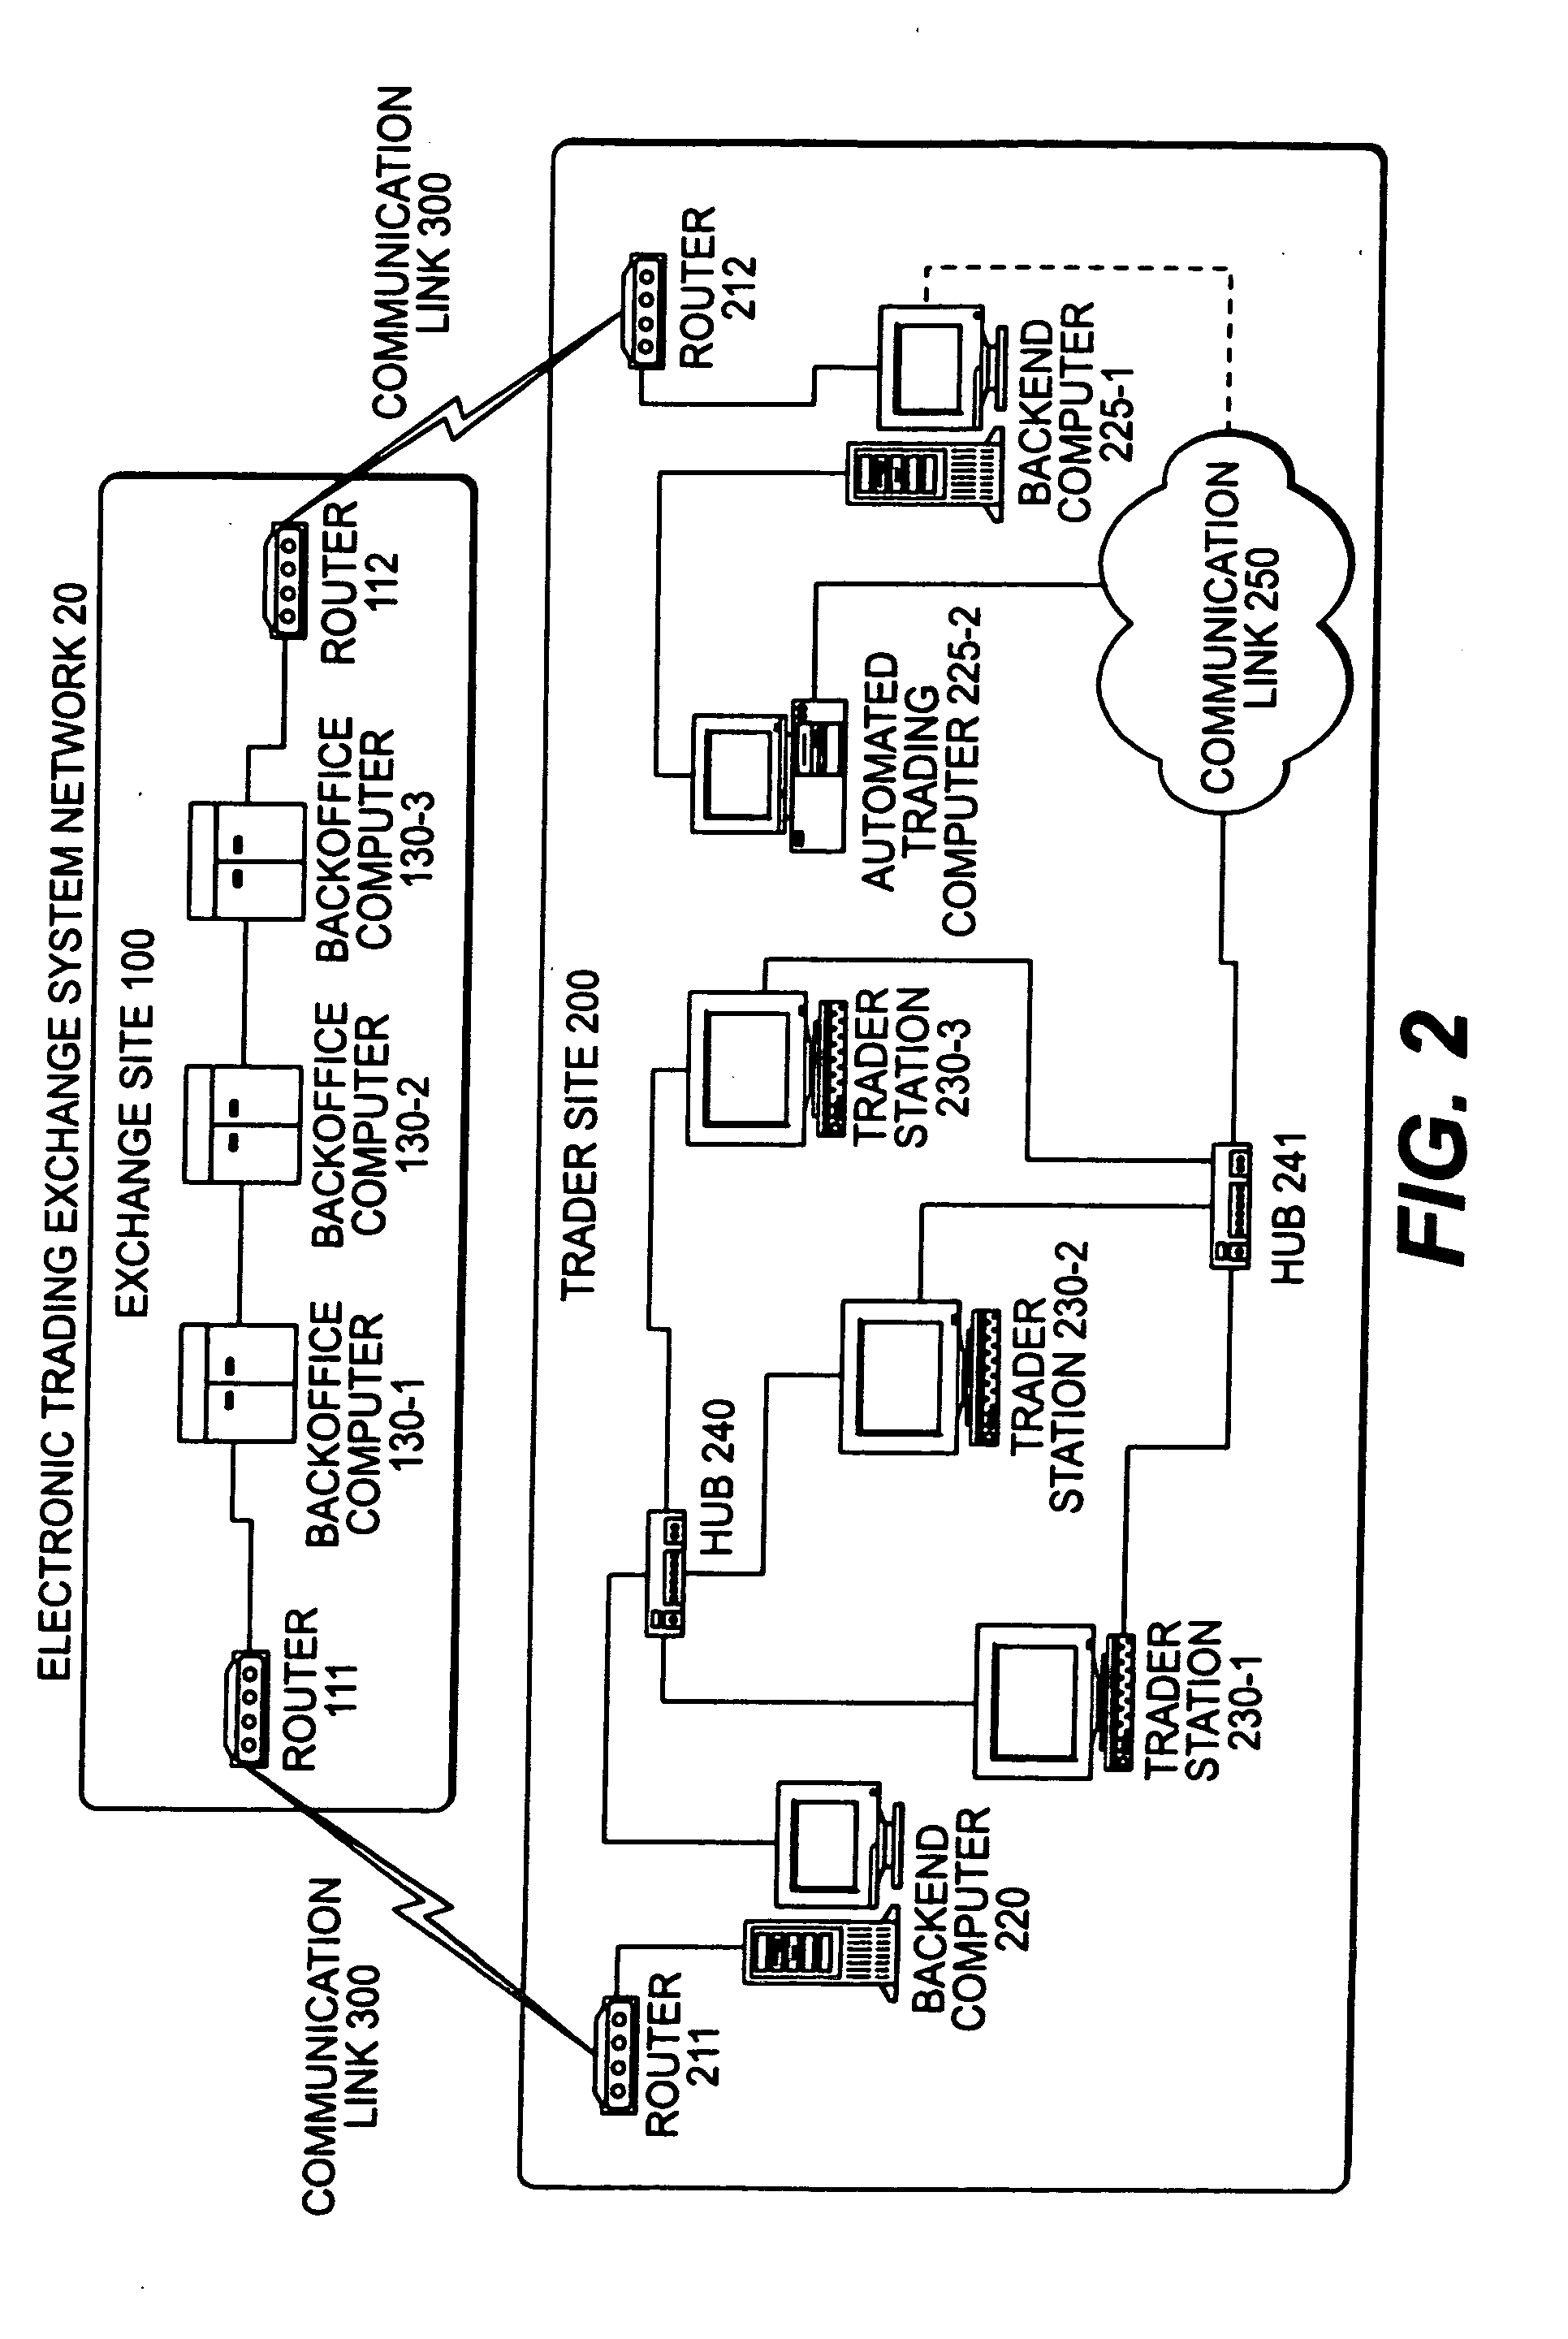 Automated trading system in an electronic trading exchange